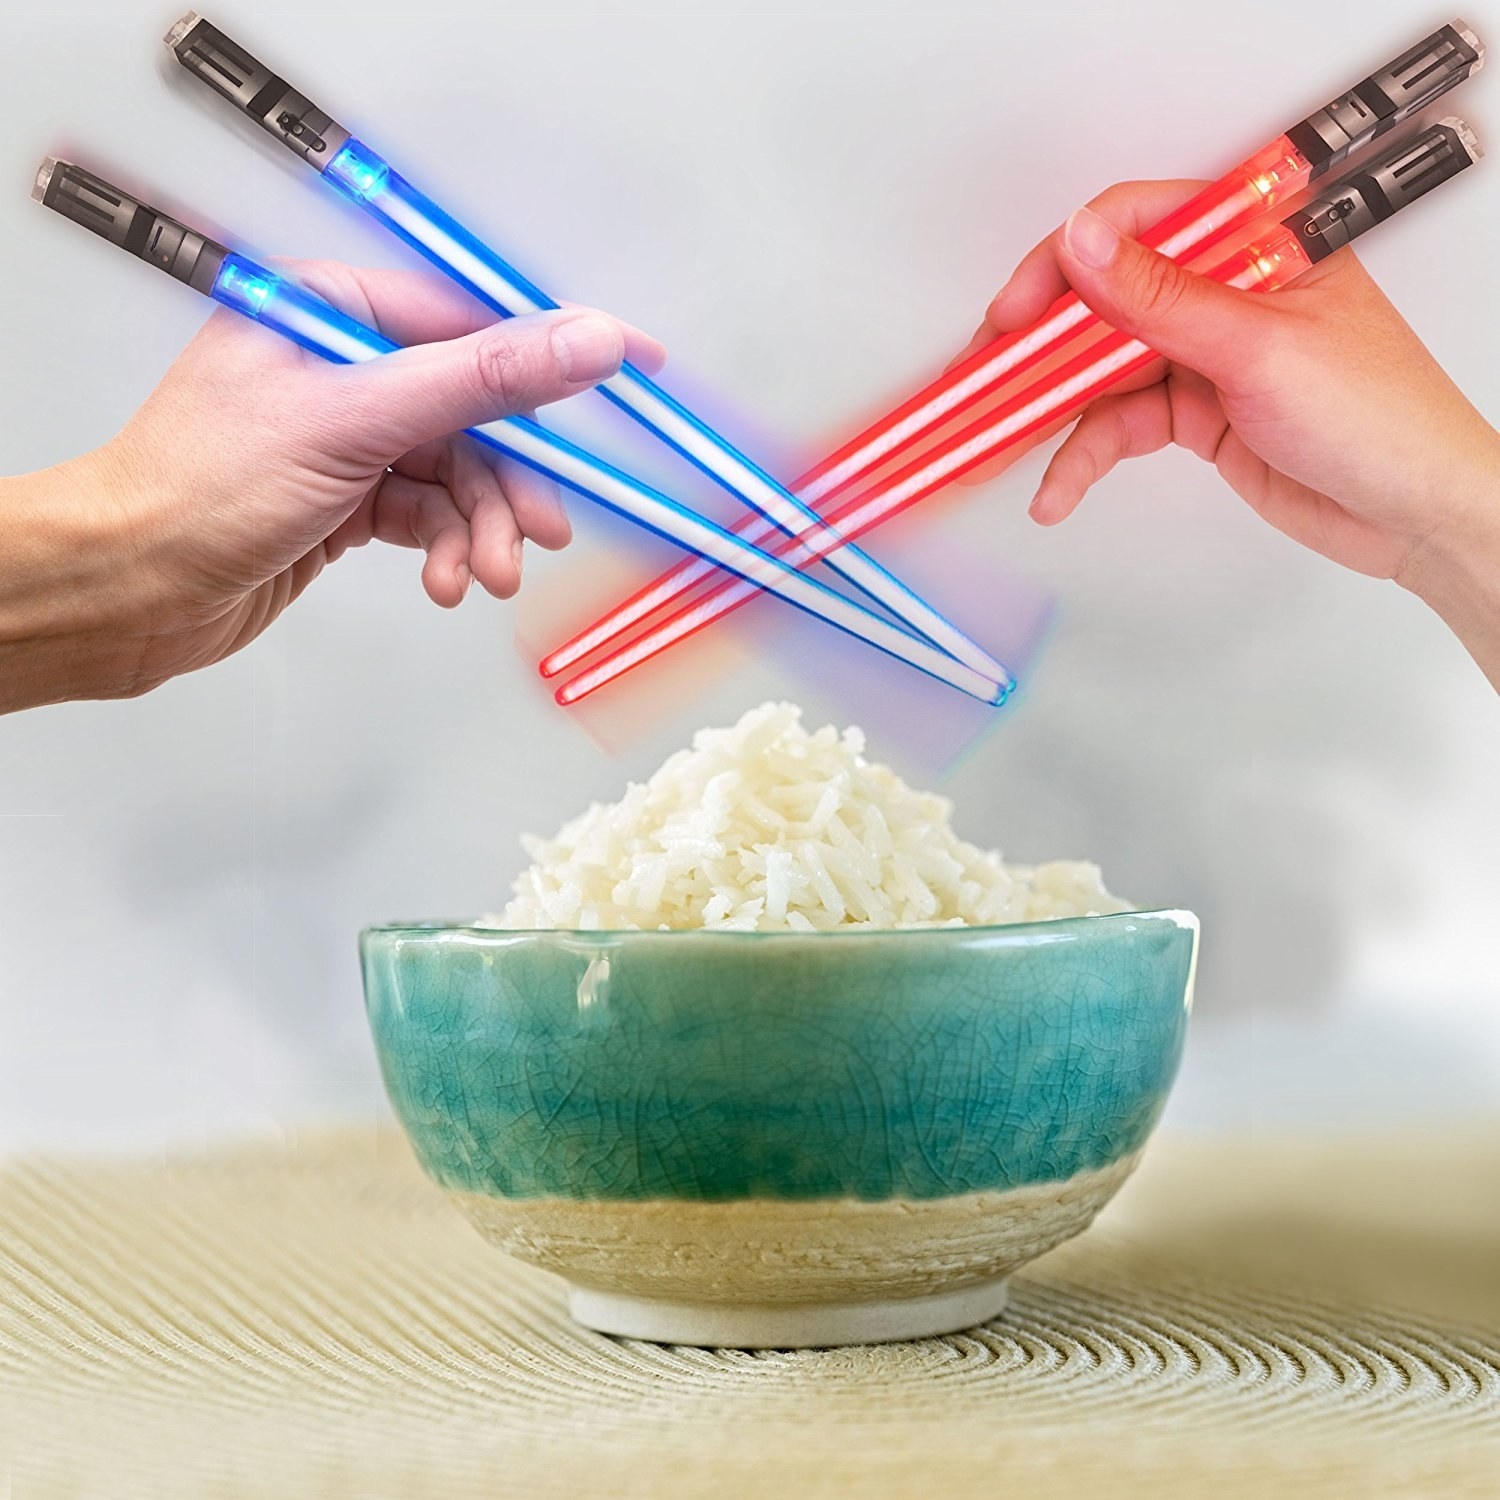 Two people battling over a bowl of rice with their glowing chopsticks